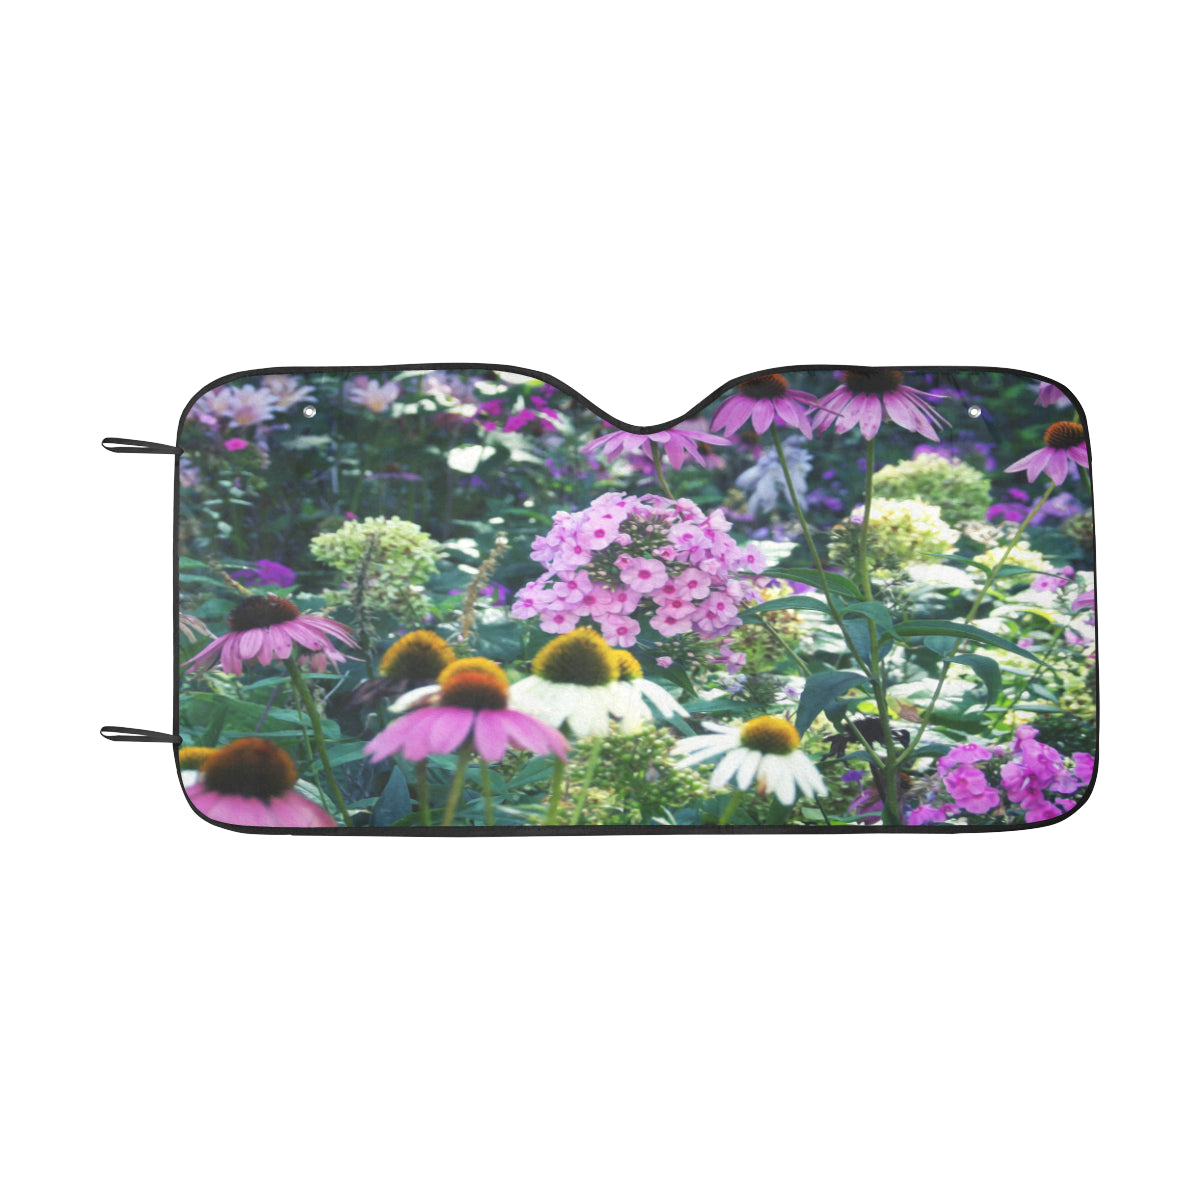 Auto Sun Shade, Pink Garden Phlox Landscape with Cone Flowers